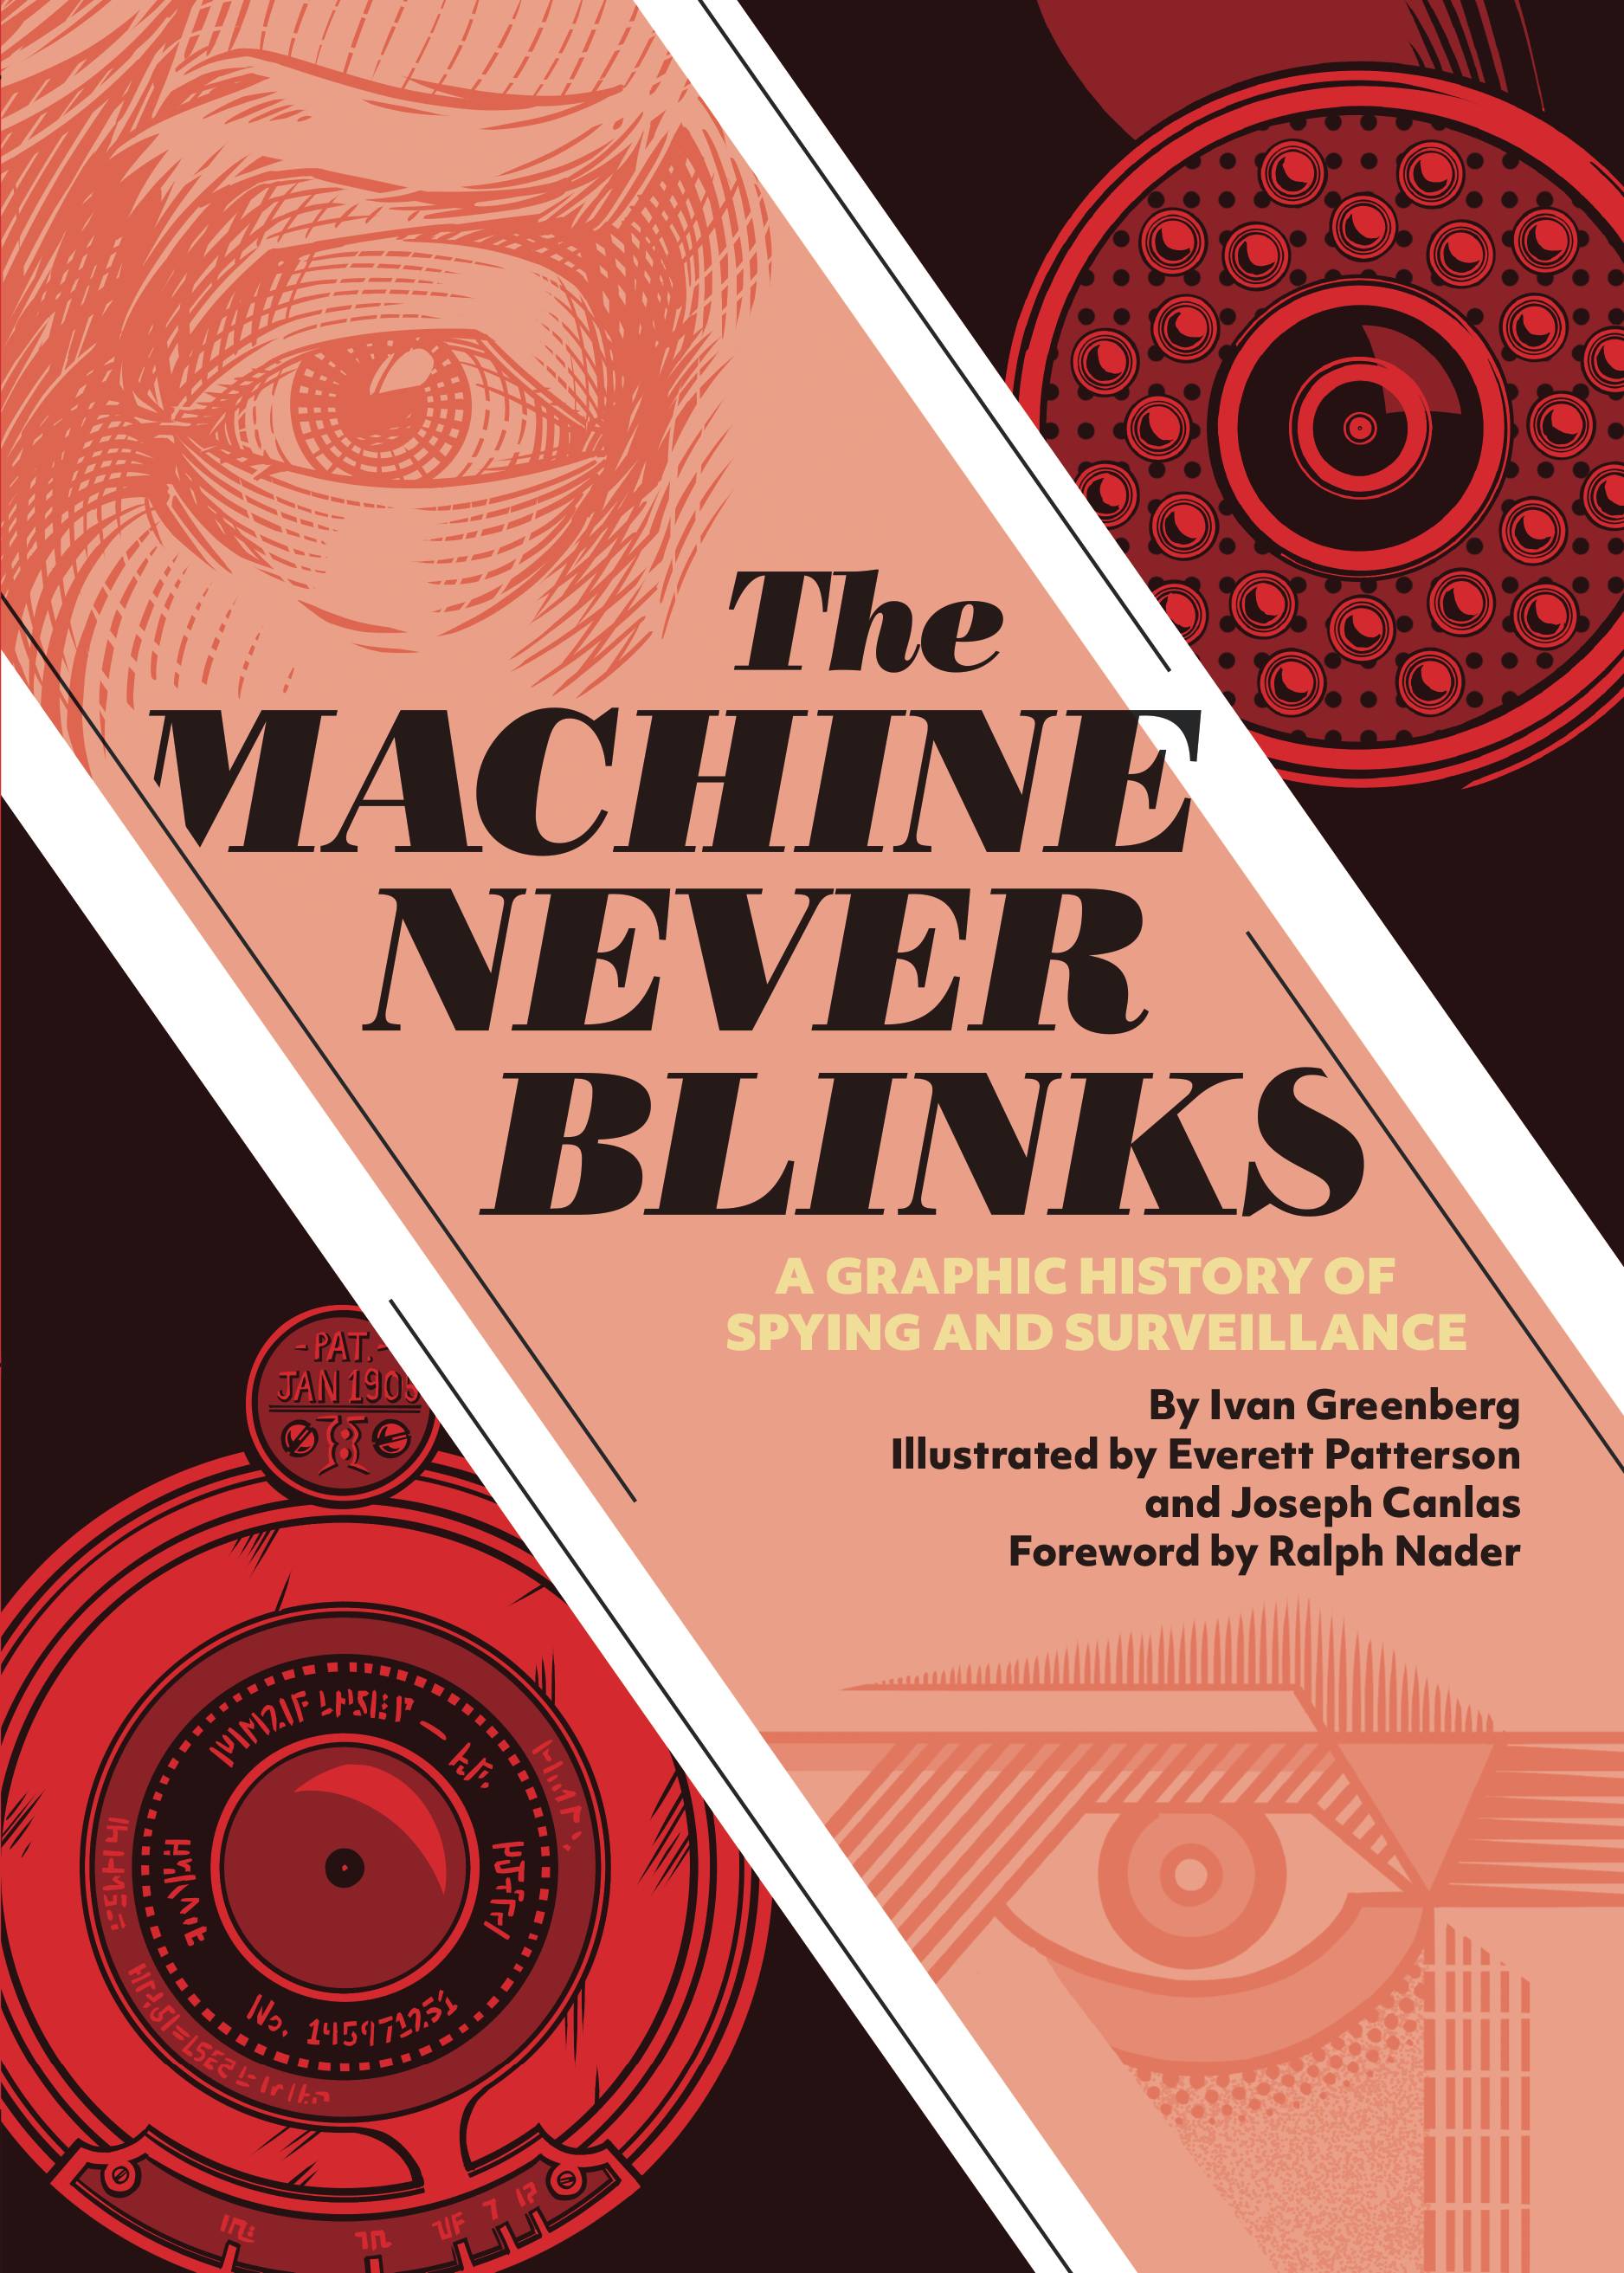 The Machine Never Blinks h/c - A Graphic History Of Spying And Surveillance h/c